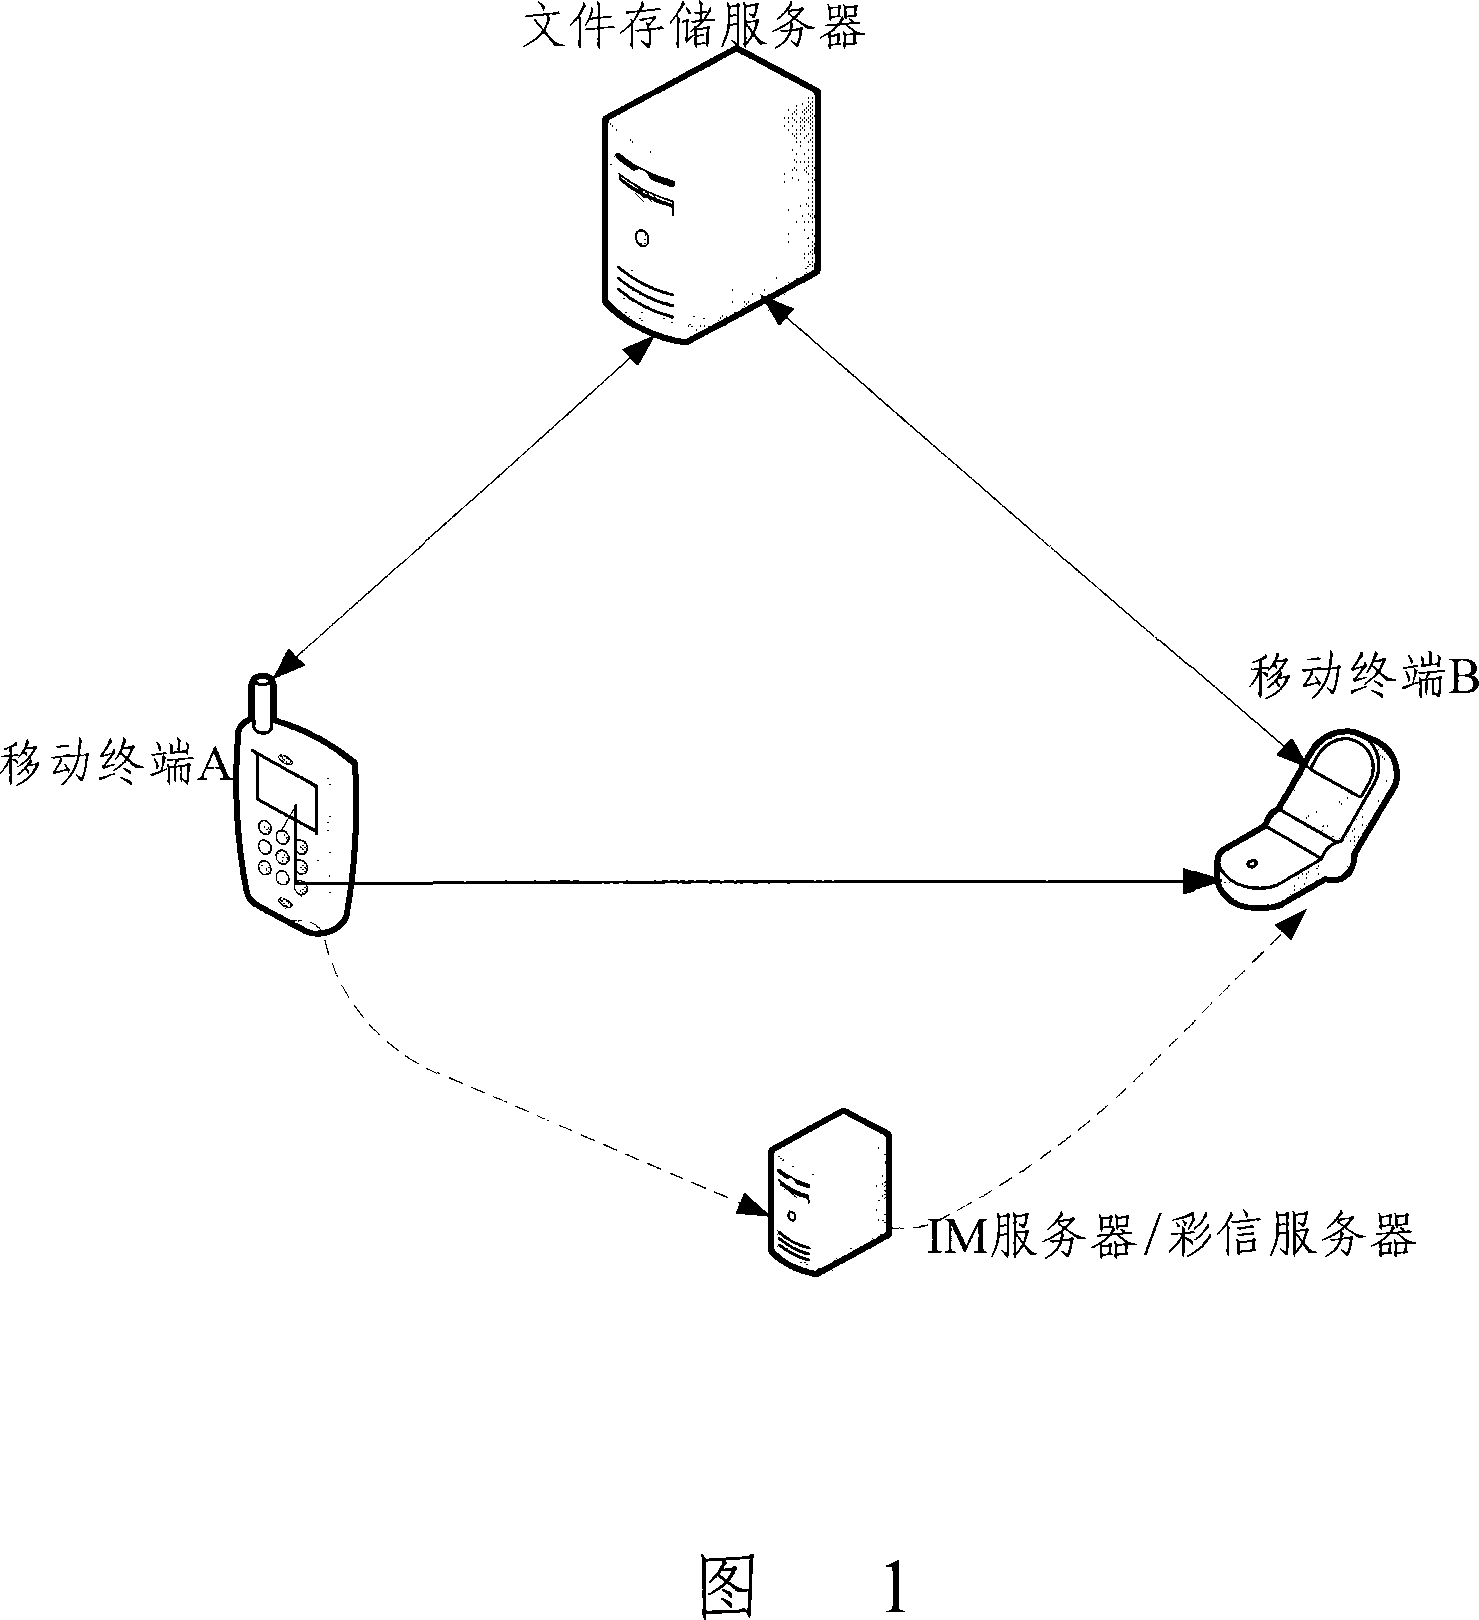 A real time file transmission method, system and device